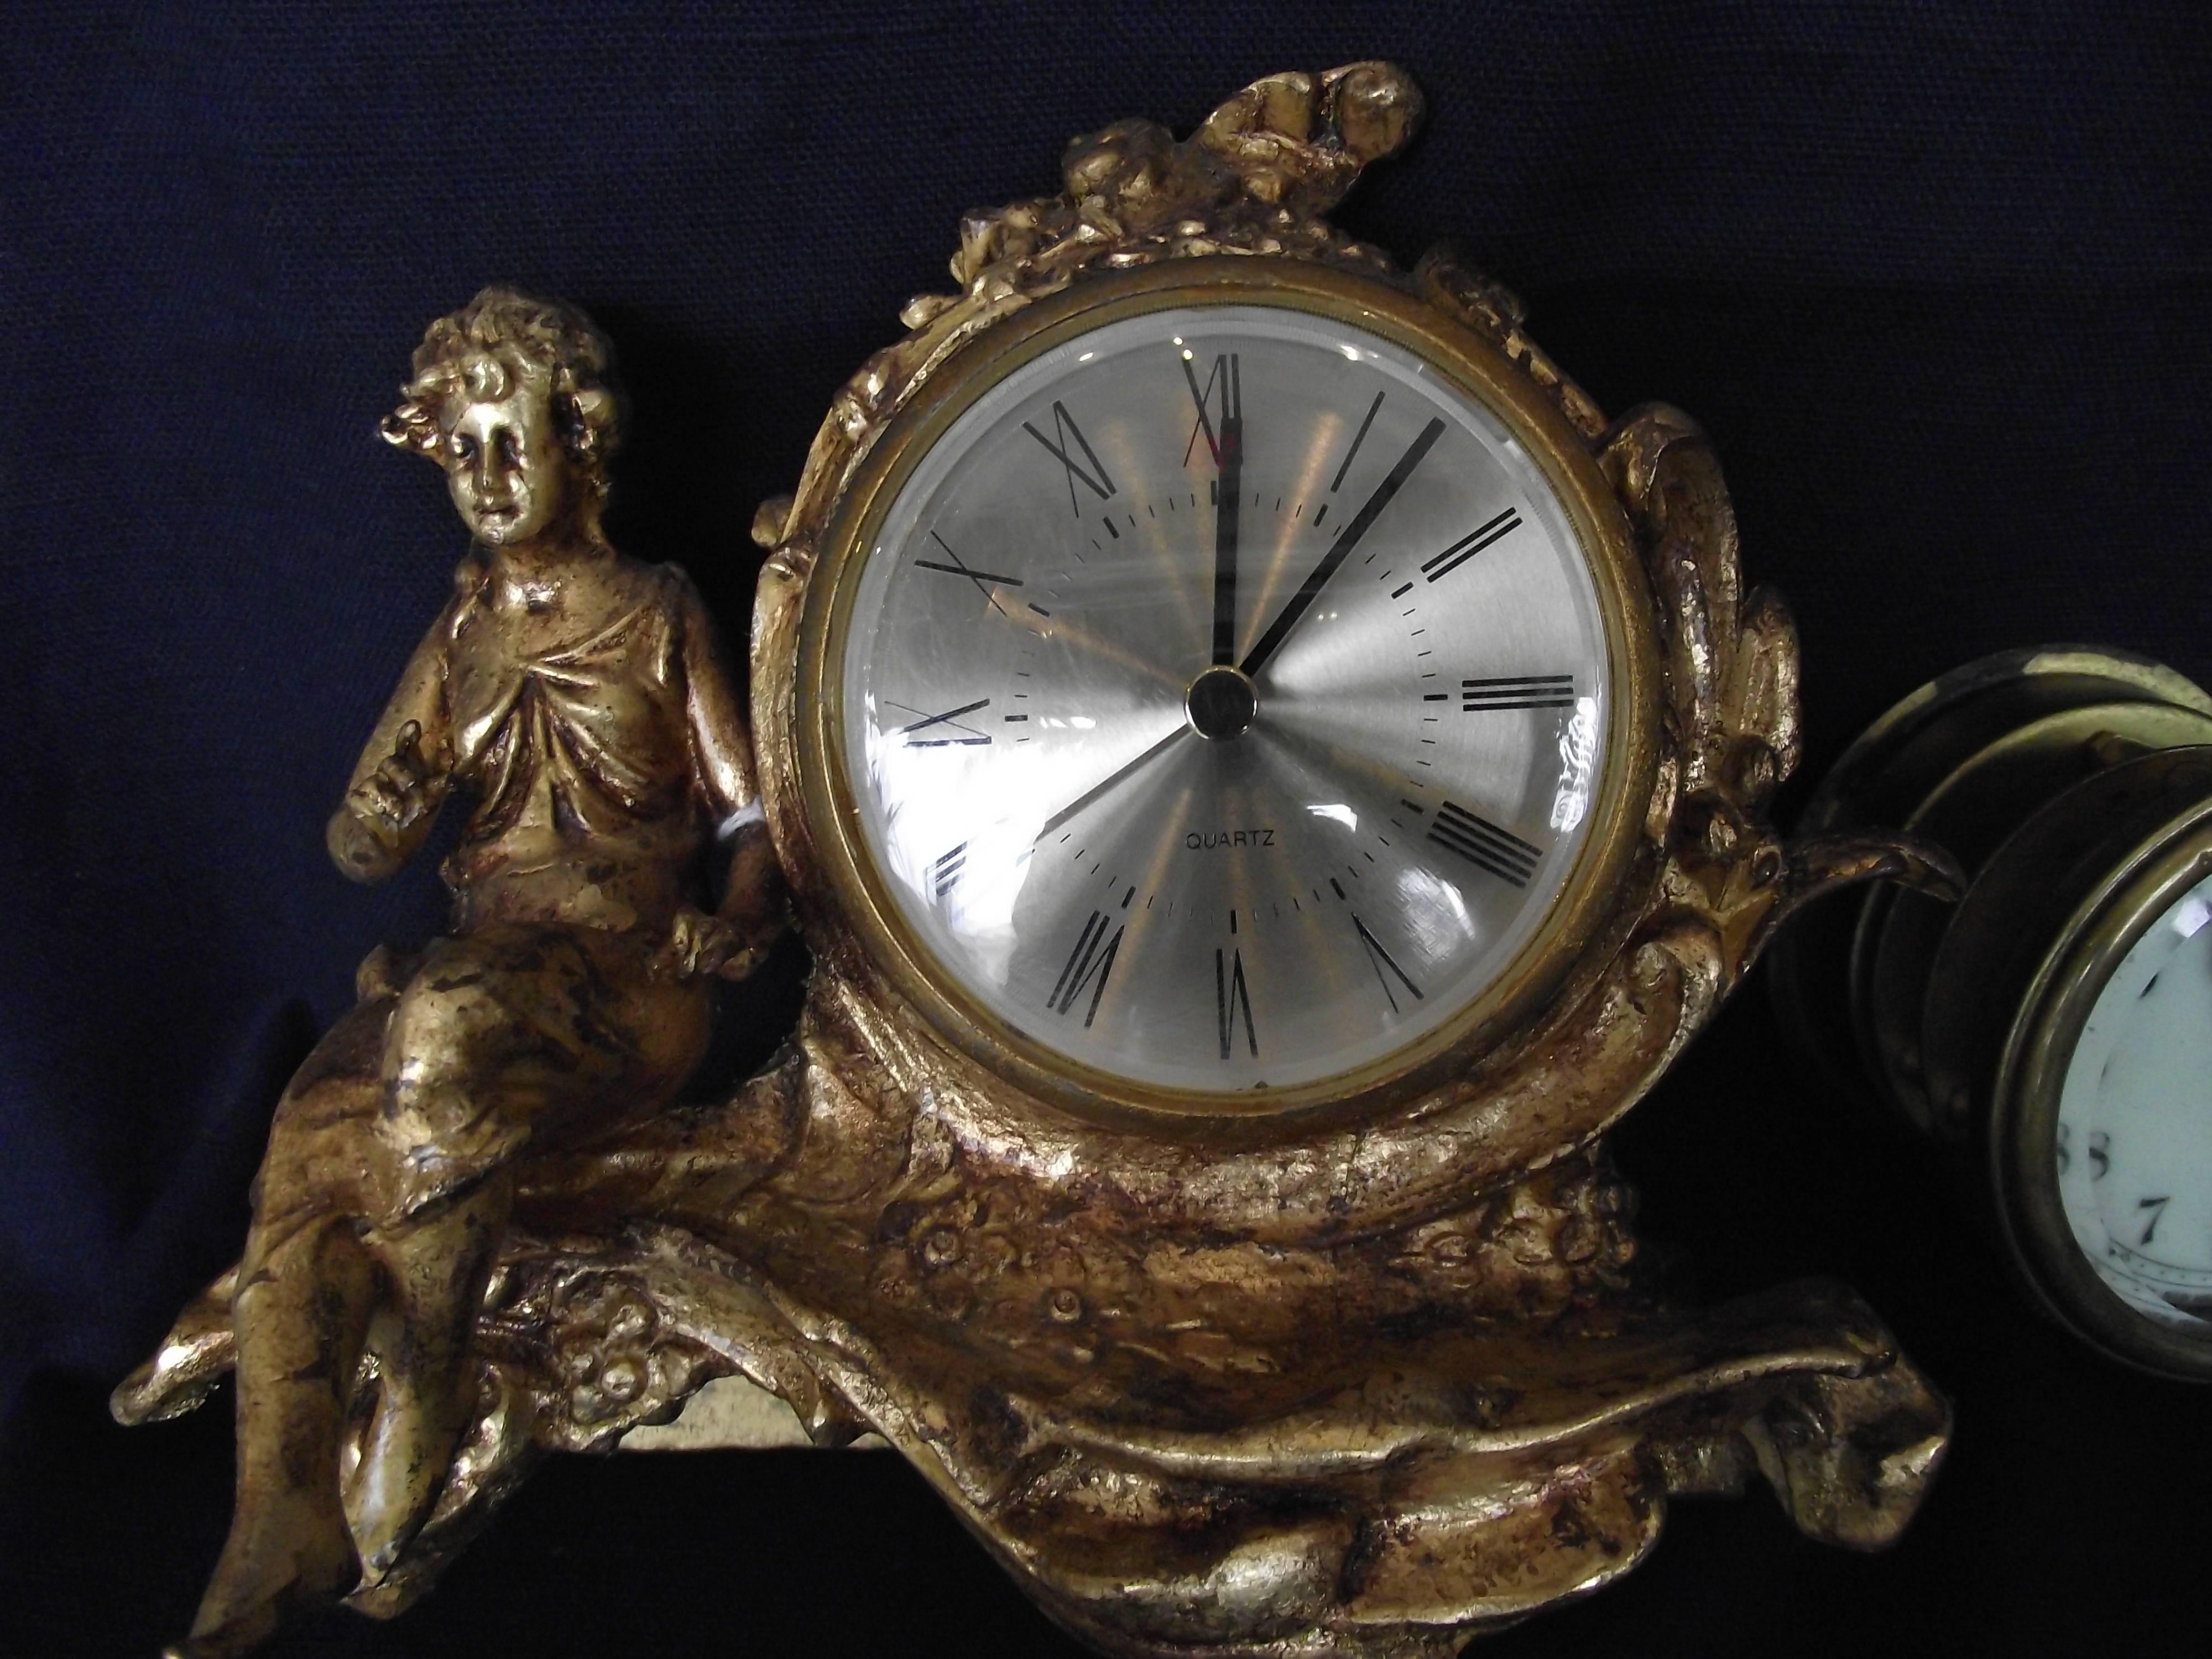 This beautiful Art Nouveau clock is outfitted with a battery insert clock.

The original works are included with the clock. The original works are eight-day wind and is in need of approx. $200.00 worth of work.

The gold finish has been restored